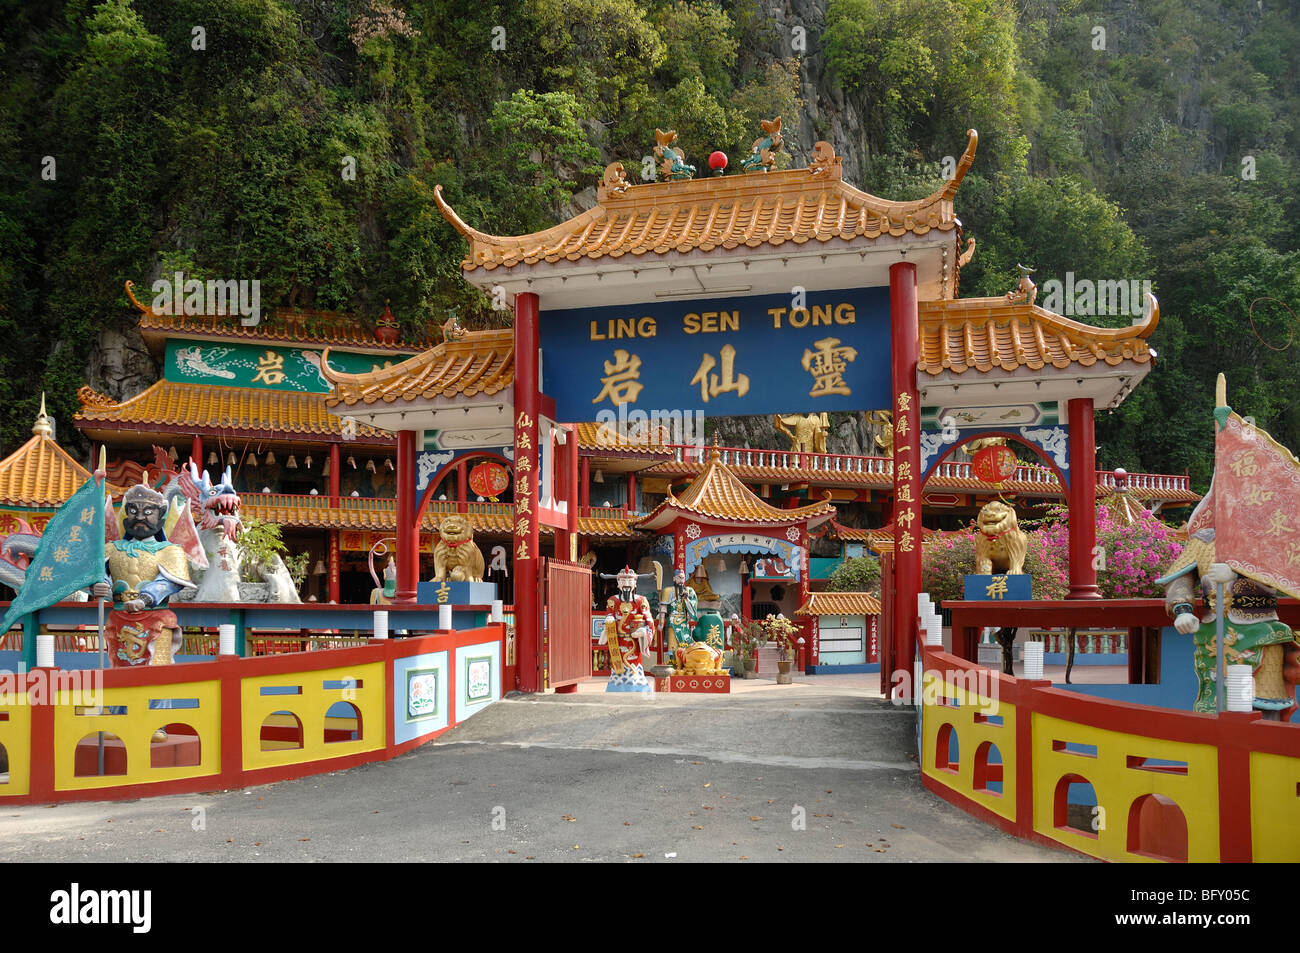 Main Entrance Gateway to the Colourful Contemporary Ling Sen Tong Chinese Taoist or Tao Cave Temple, Ipoh, Perak, Malaysia Stock Photo